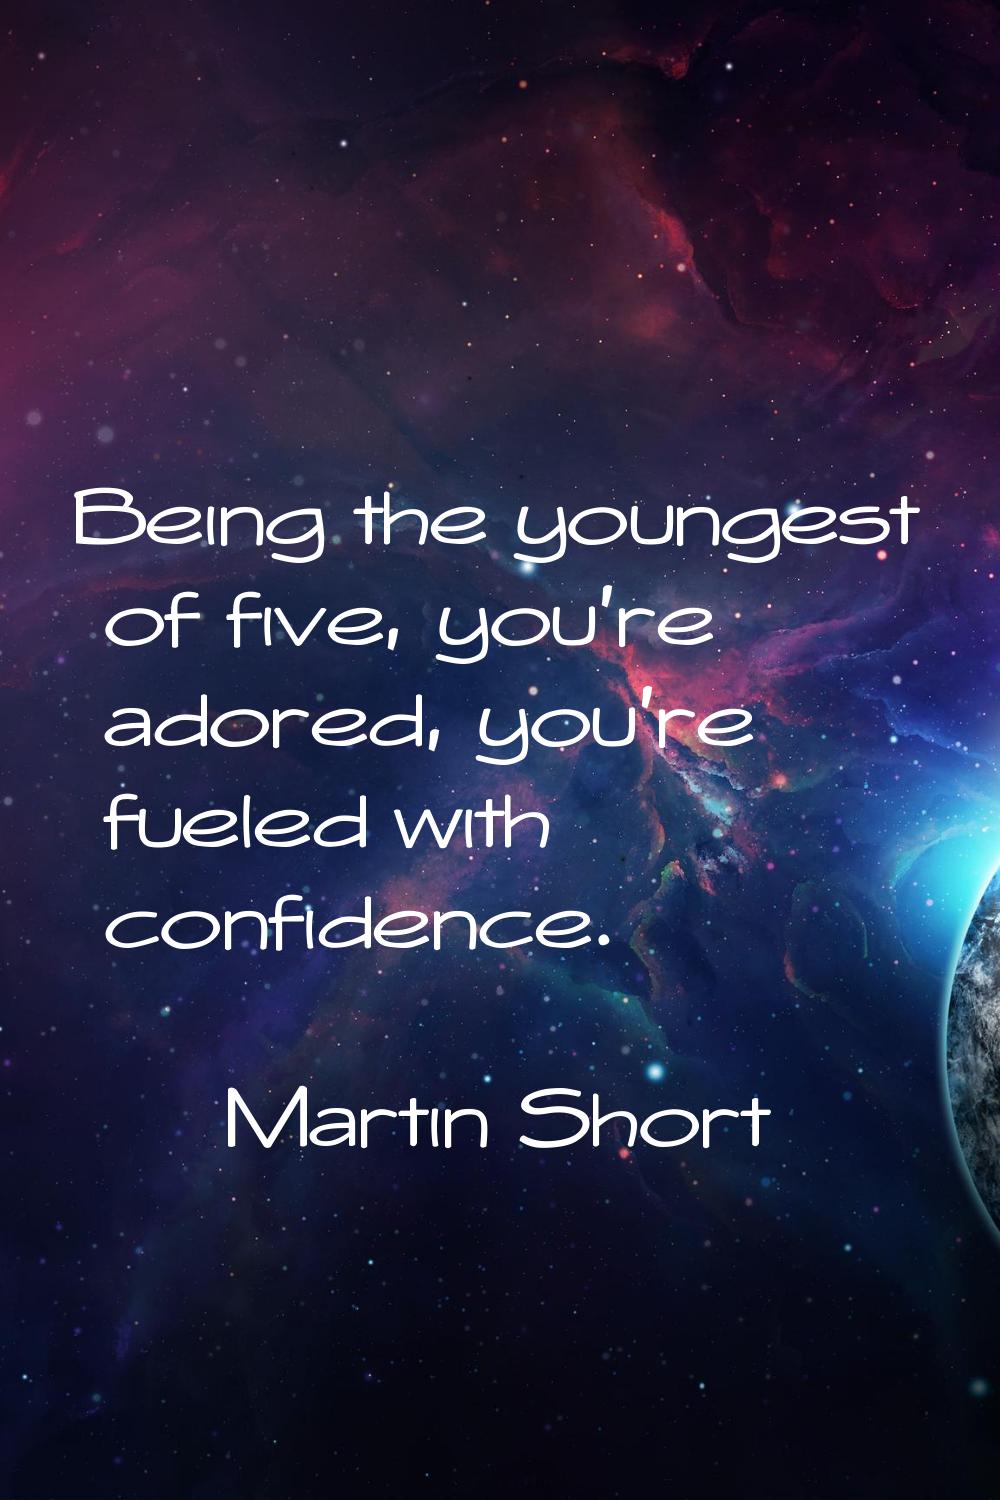 Being the youngest of five, you're adored, you're fueled with confidence.